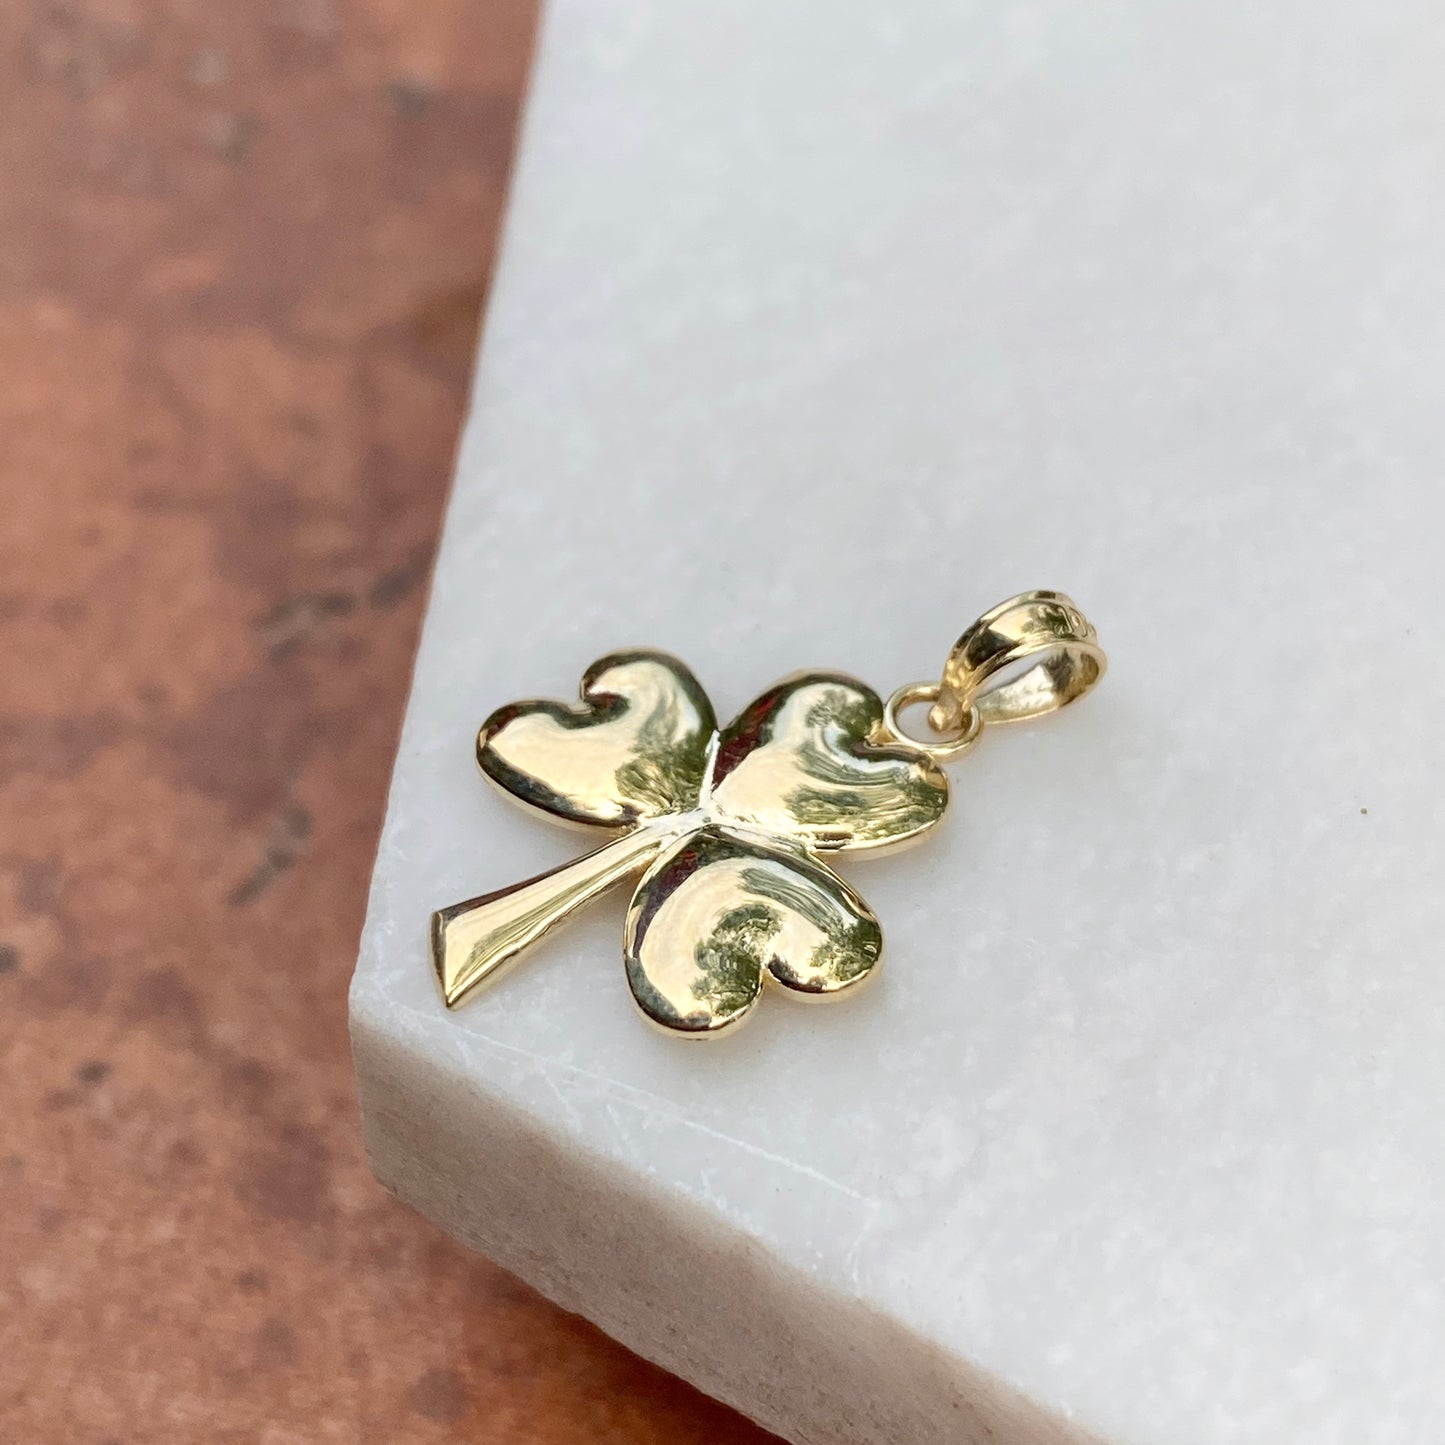 10KT Yellow Gold High Polished 3-Leaf Clover Pendant Charm, 10KT Yellow Gold High Polished 3-Leaf Clover Pendant Charm - Legacy Saint Jewelry